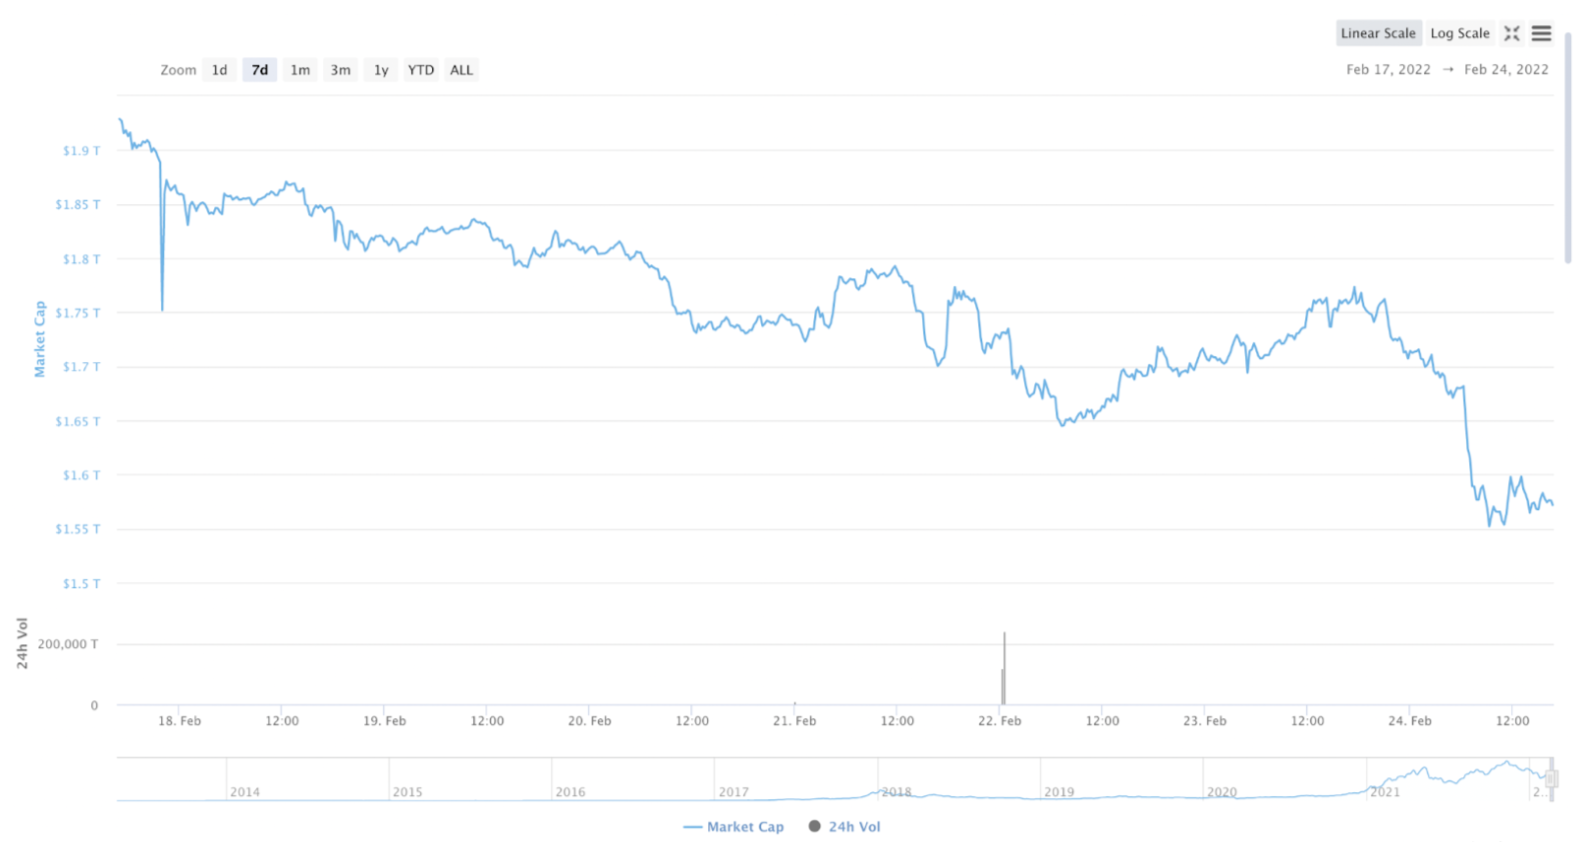 Cryptocurrency market cap chart from CoinMarketCap (Feb 17 2022 - Feb 24 2022)